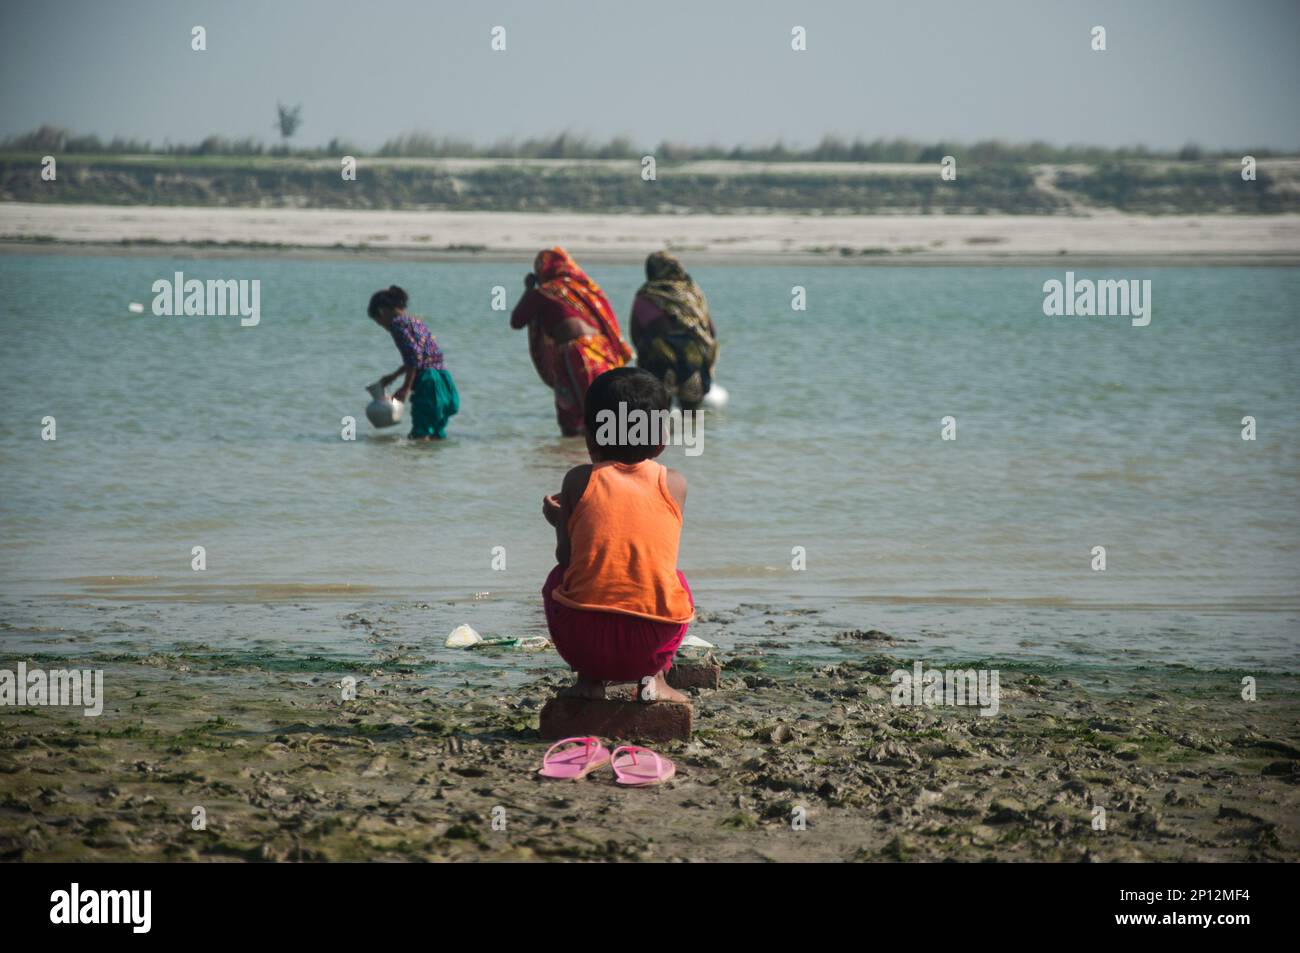 Pictures of padma river side view in Bangladesh. Stock Photo